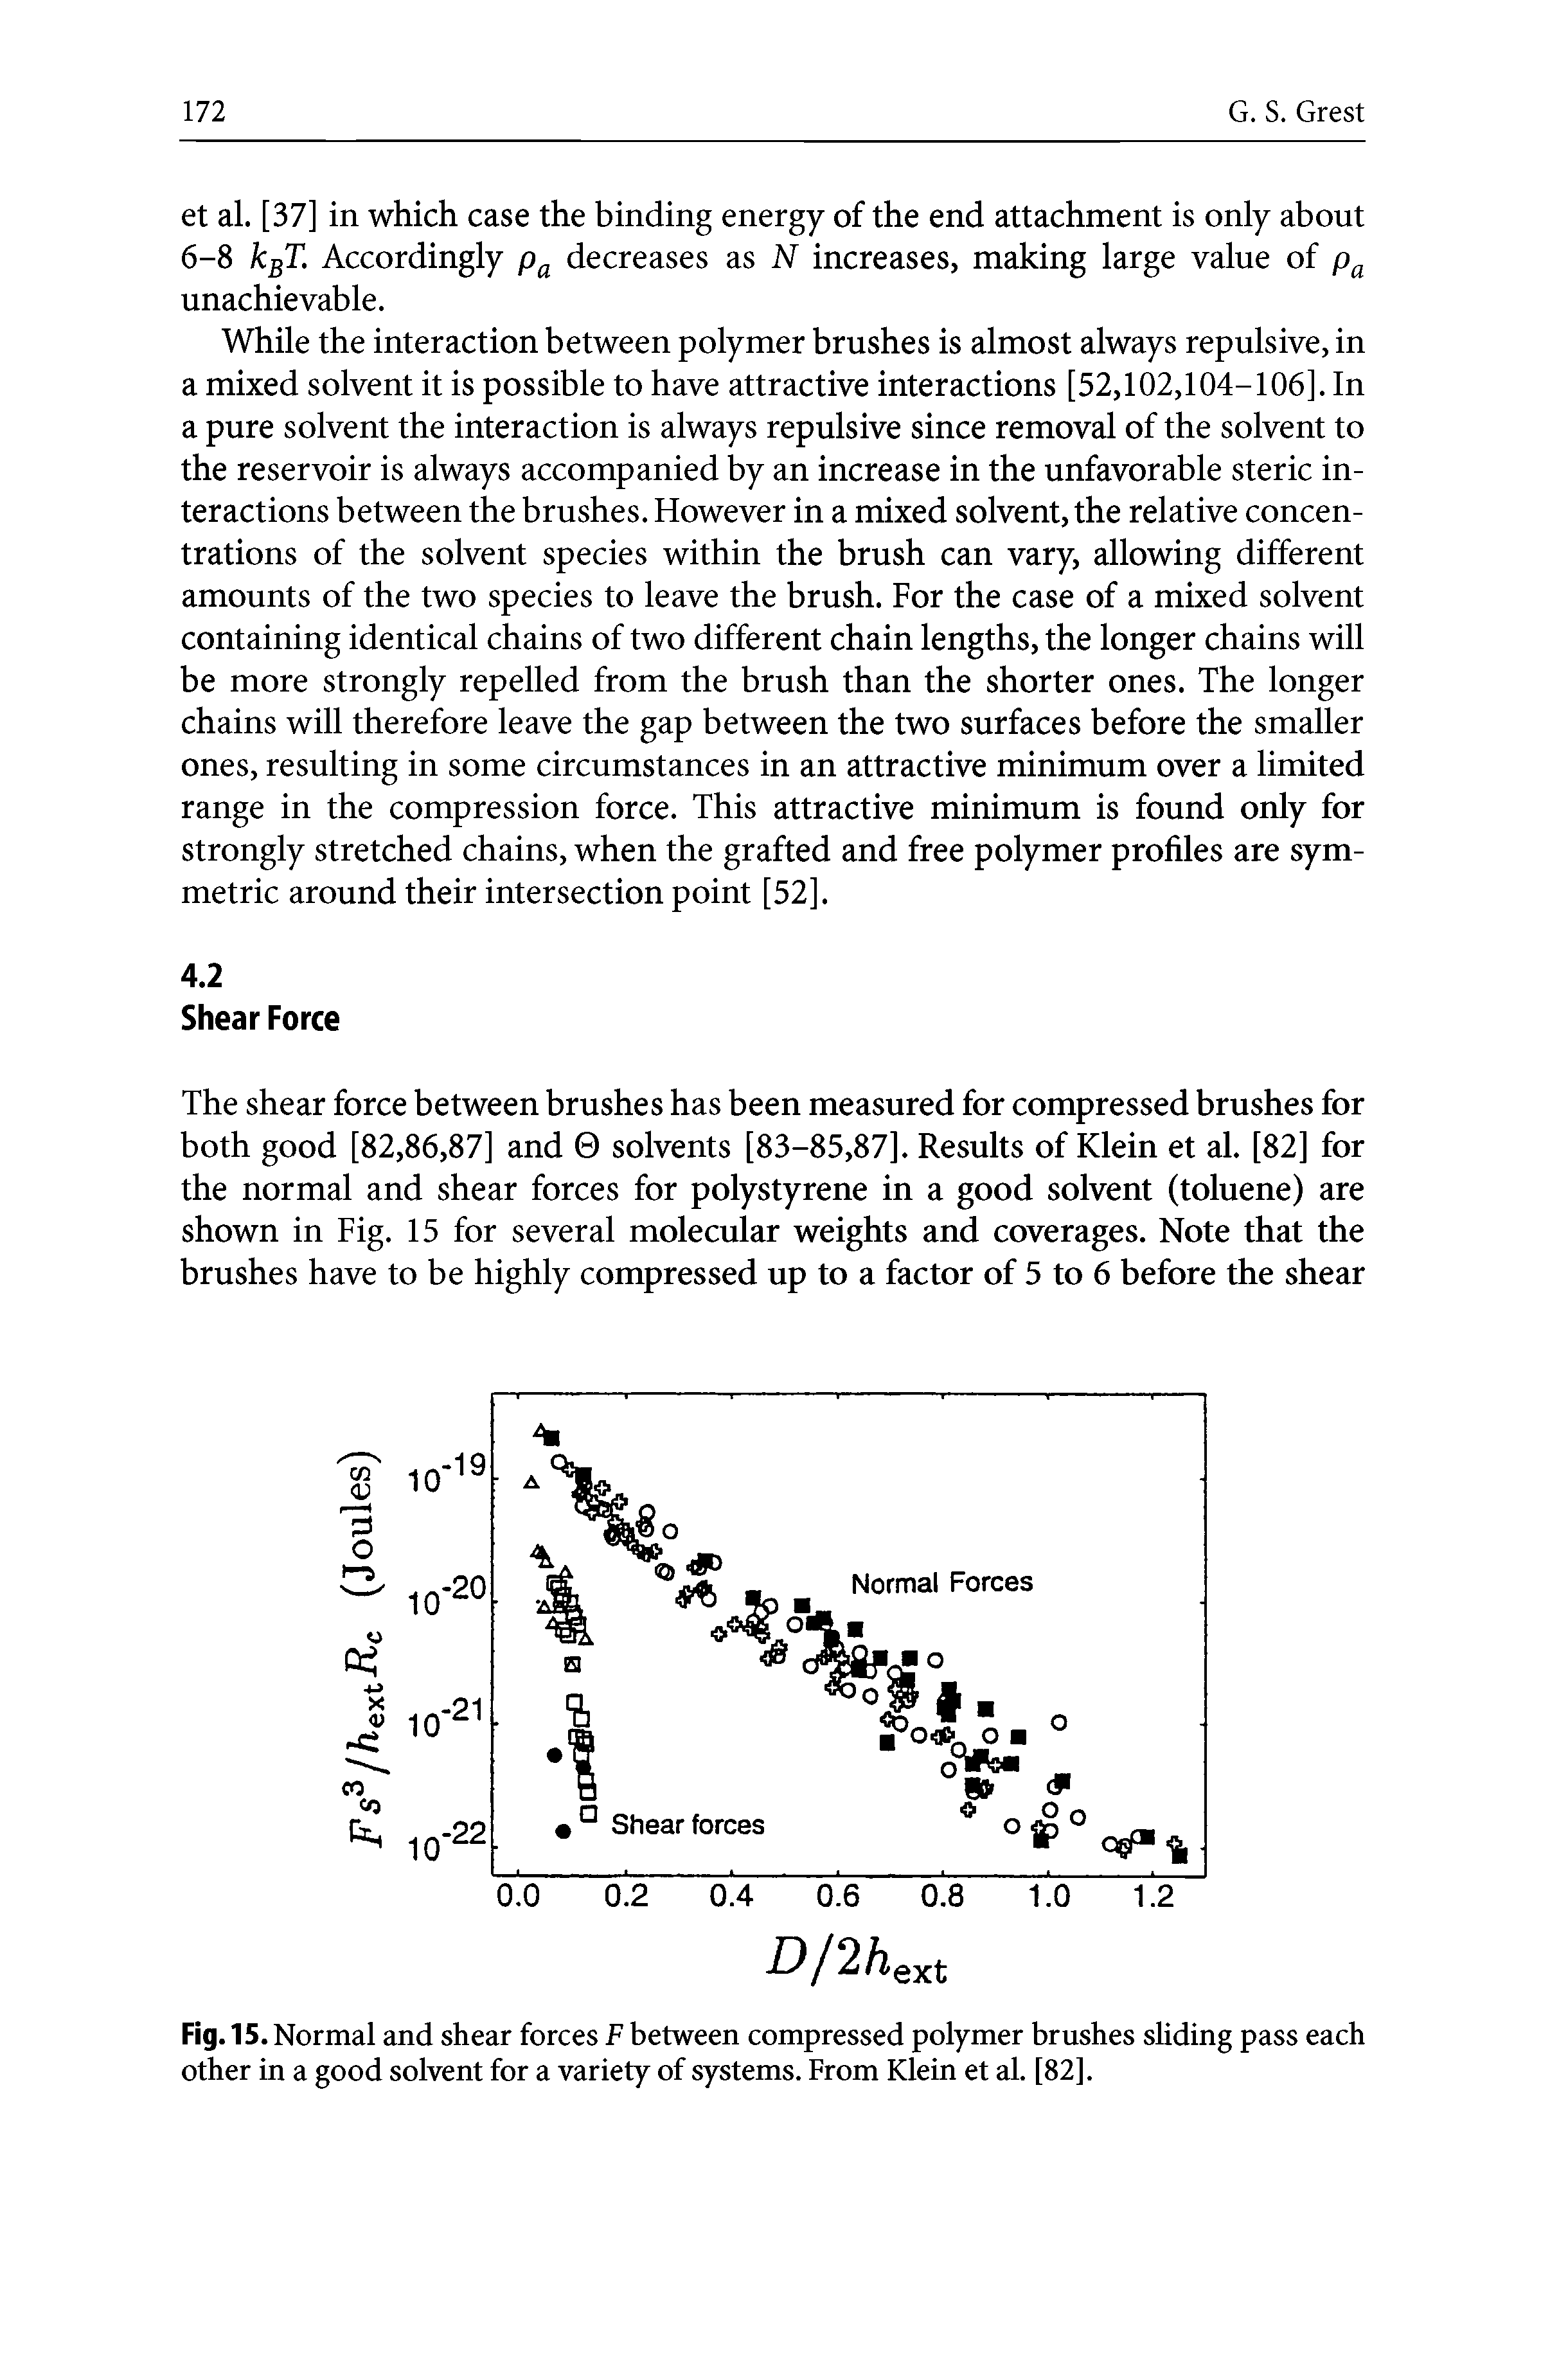 Fig. 15. Normal and shear forces F between compressed polymer brushes sliding pass each other in a good solvent for a variety of systems. From Klein et al. [82].